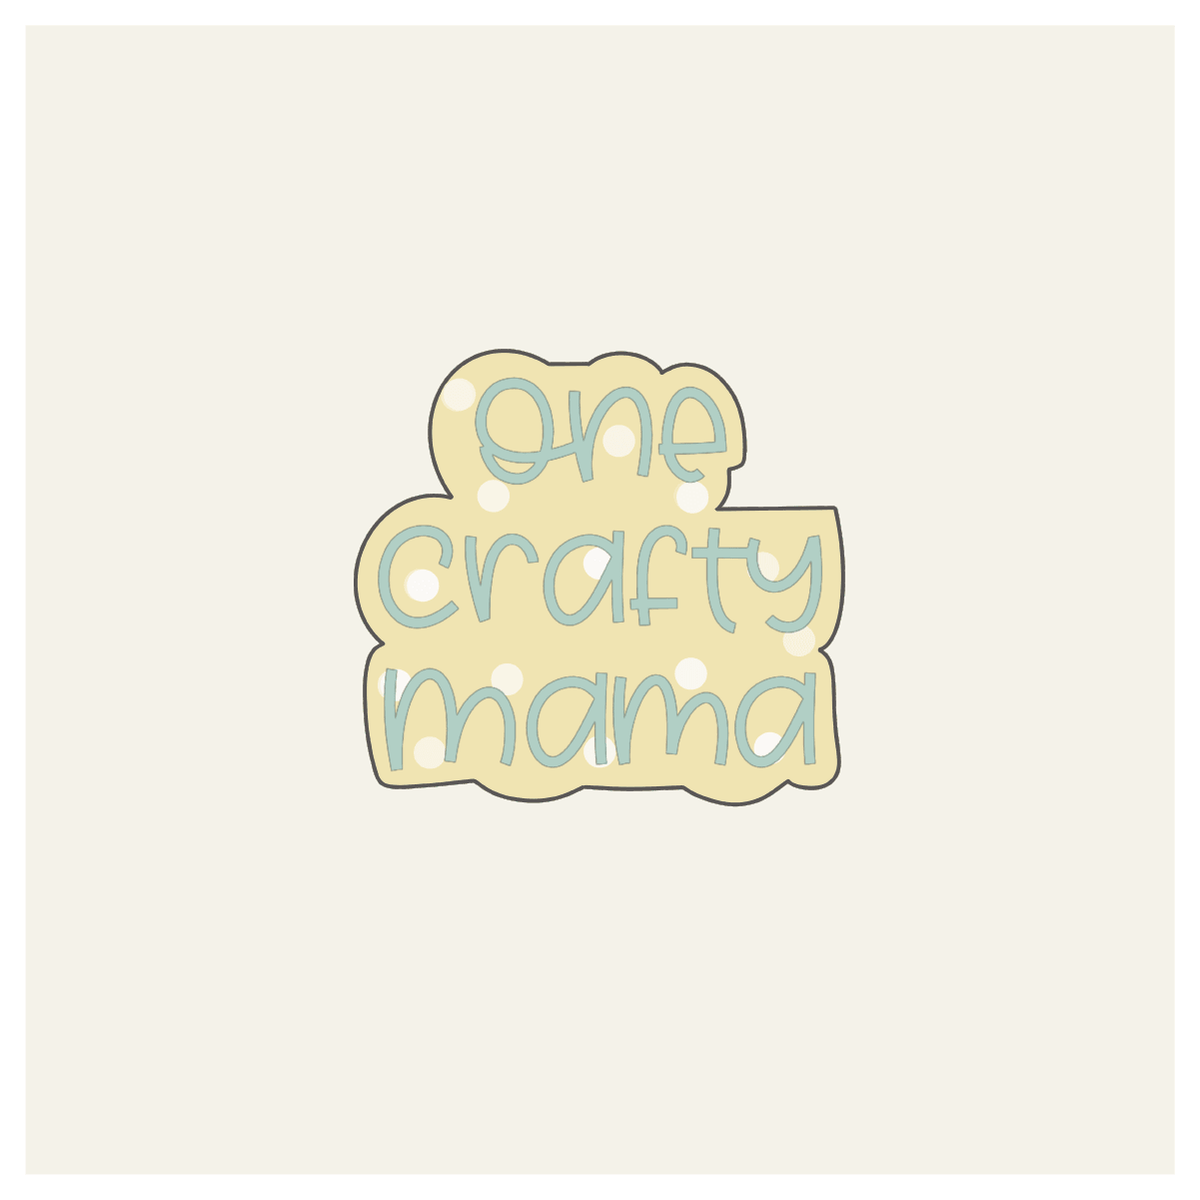 One Crafty Mama Hand Lettered Cookie Cutter - Sweetleigh 